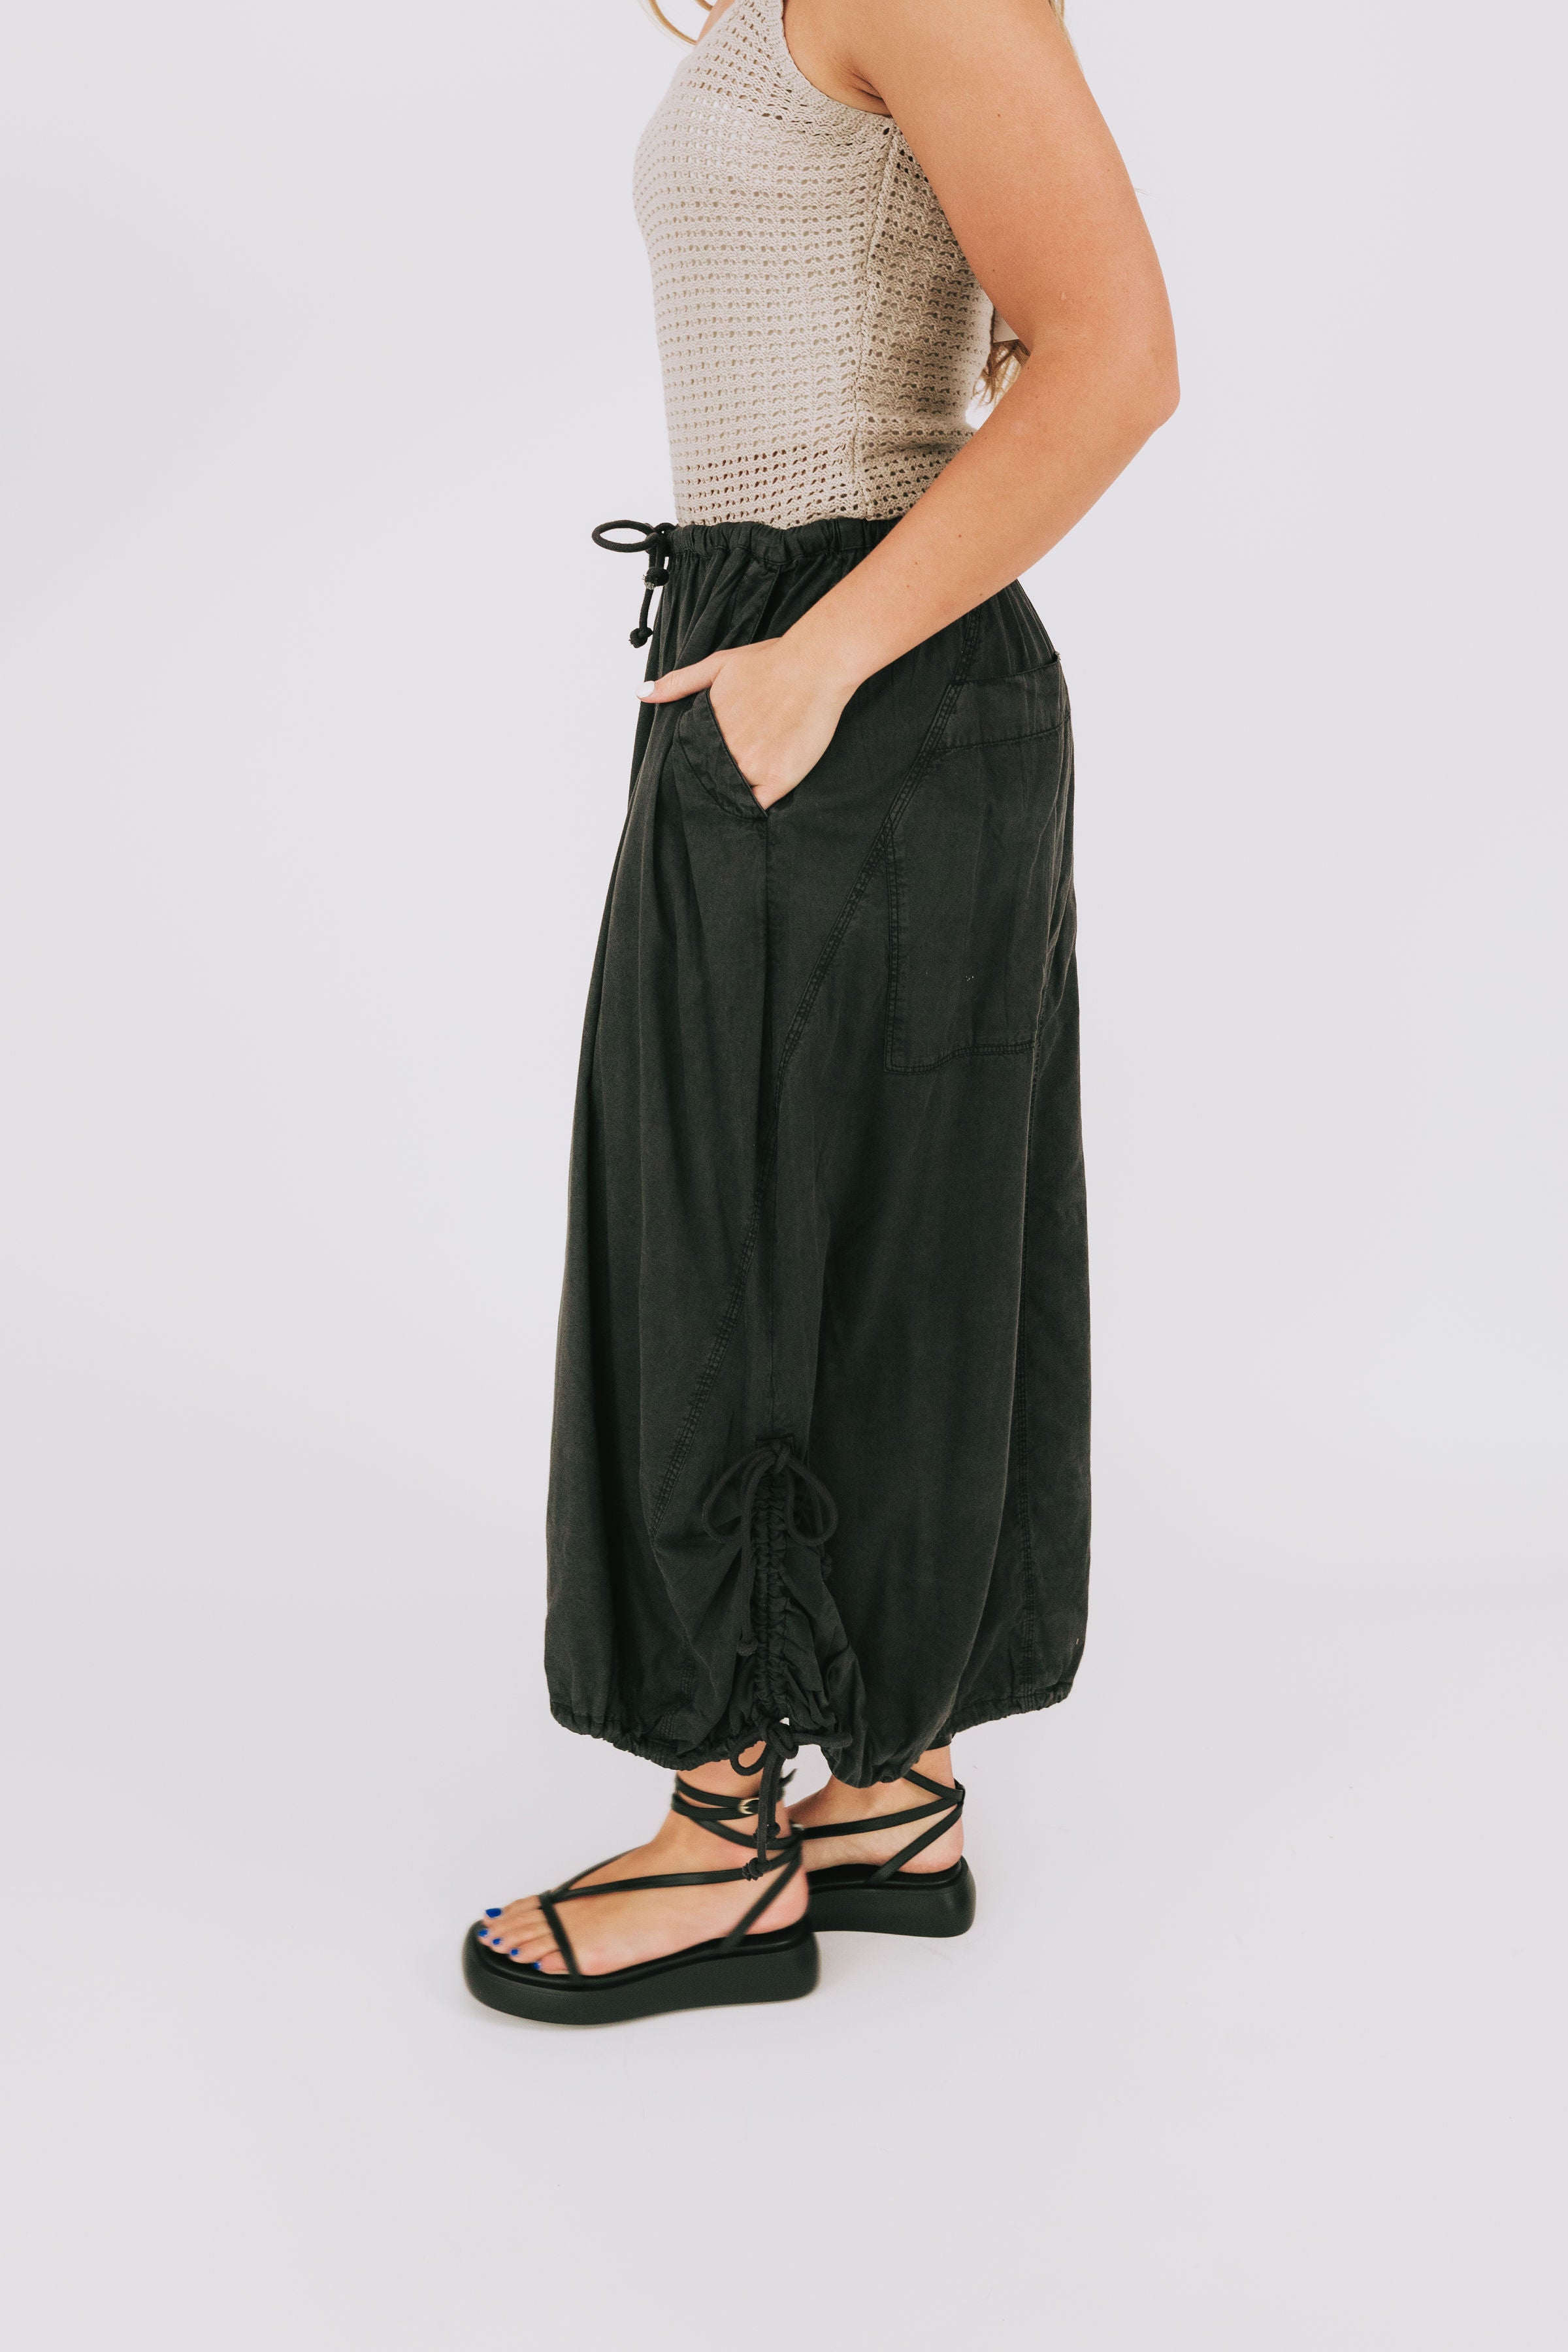 FREE PEOPLE - Picture Perfect Parachute Skirt